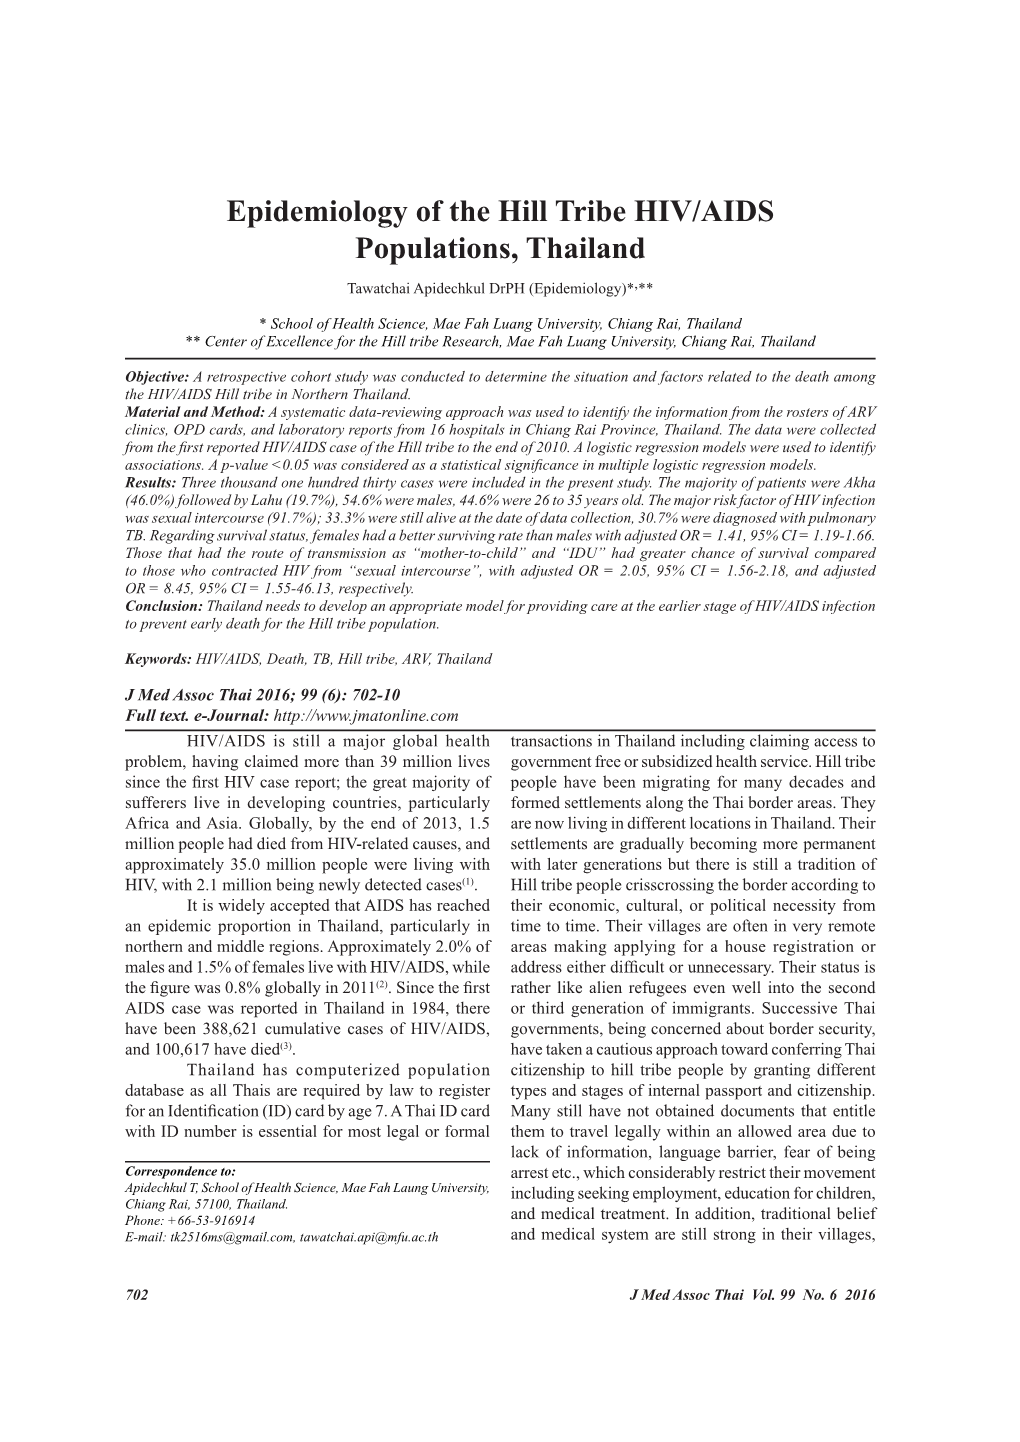 Epidemiology of the Hill Tribe HIV/AIDS Populations, Thailand